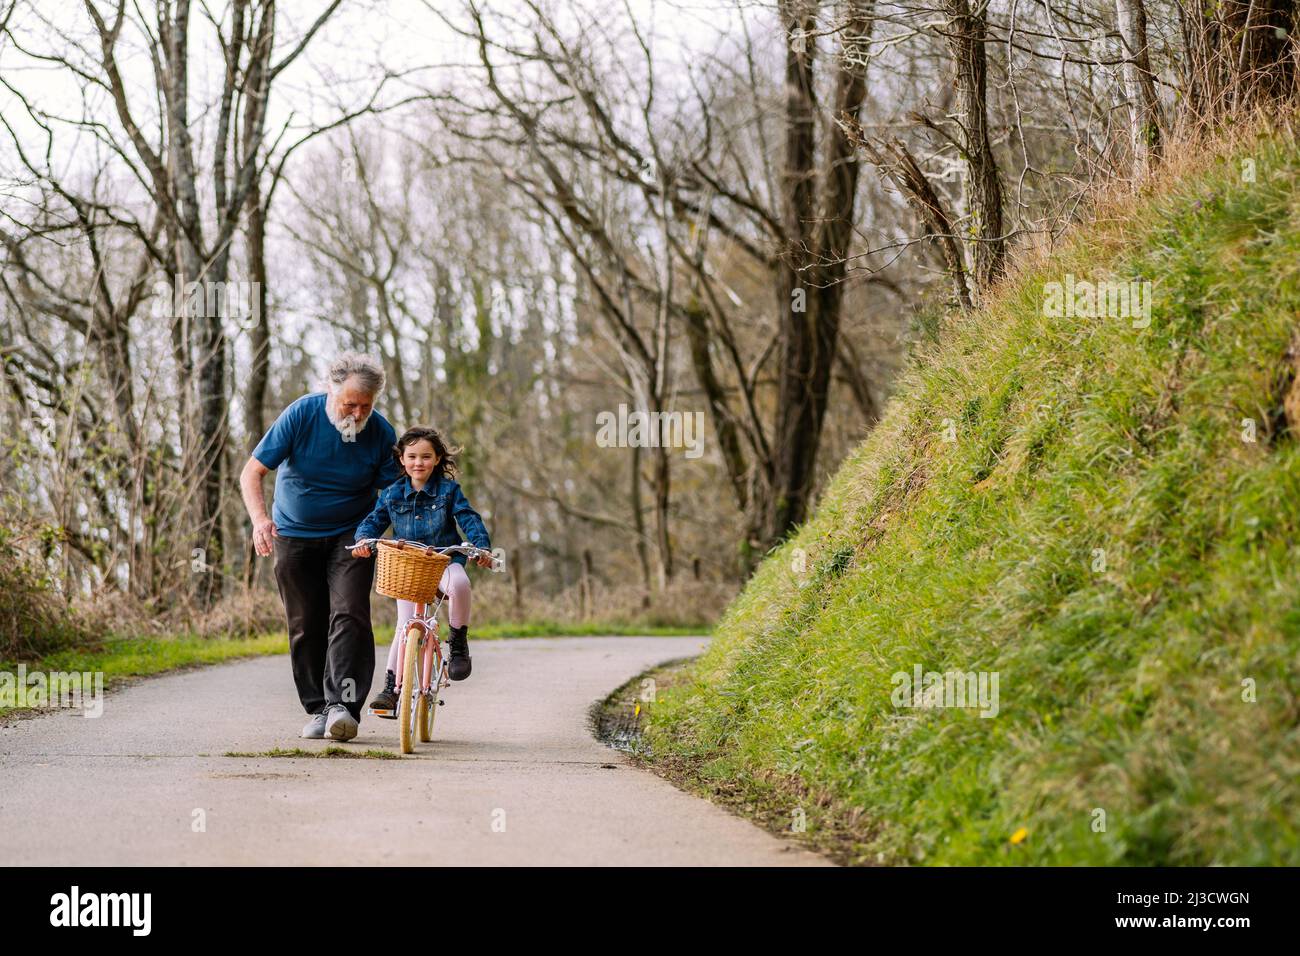 Caring grandfather helping active granddaughter riding bicycle with basket on road in countryside with green trees on summer day Stock Photo